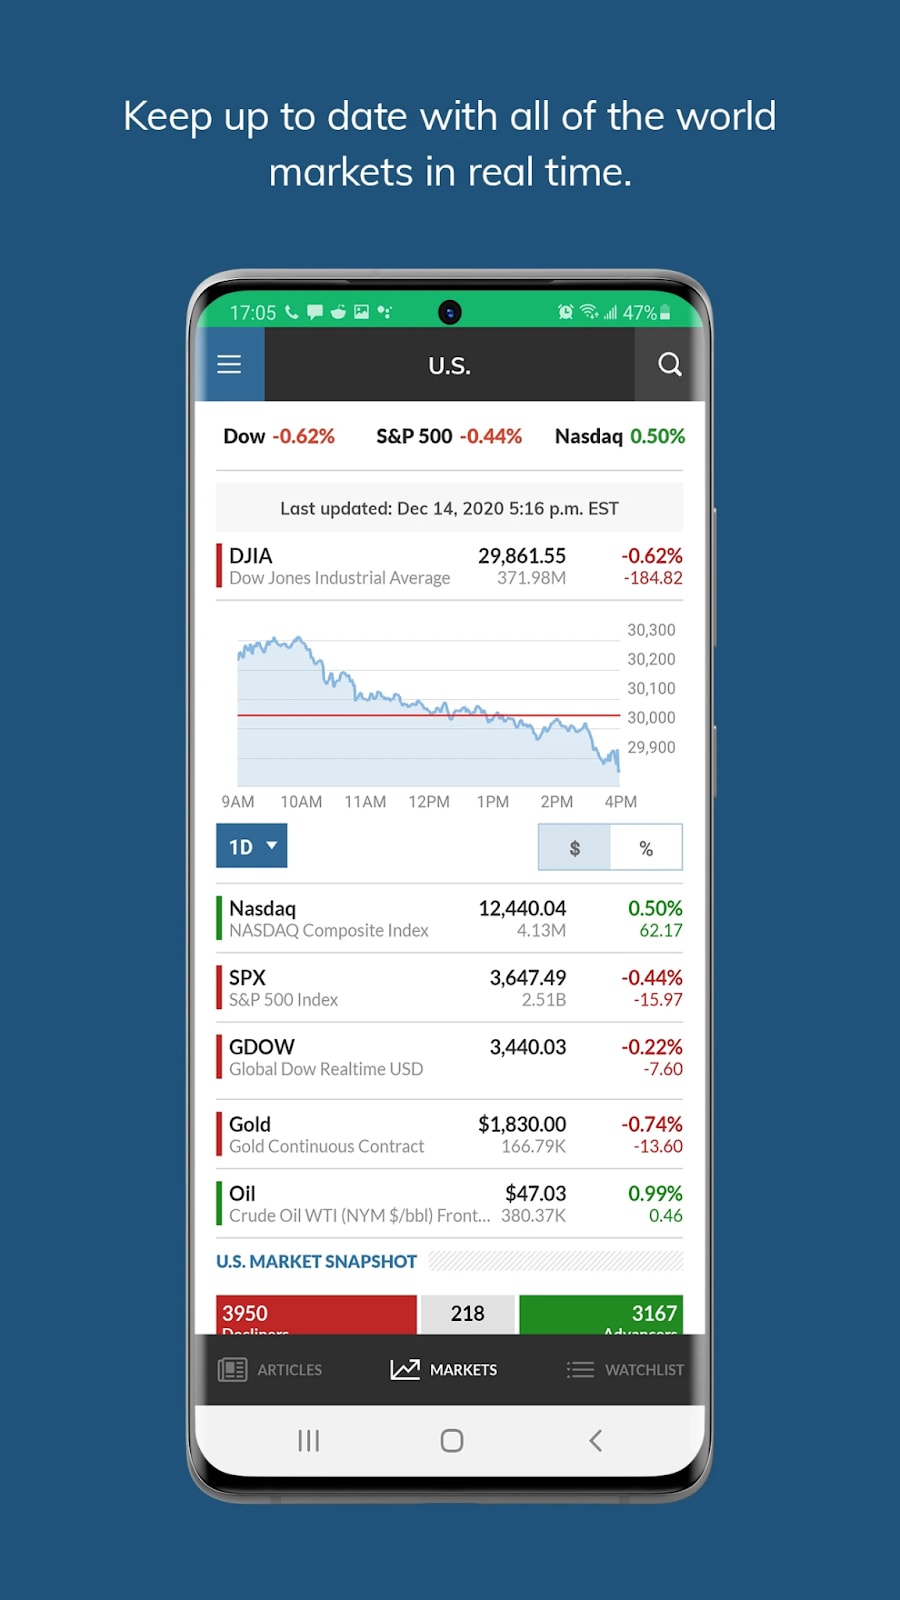 Marketwatch’s interface lets you browse the latest market data.